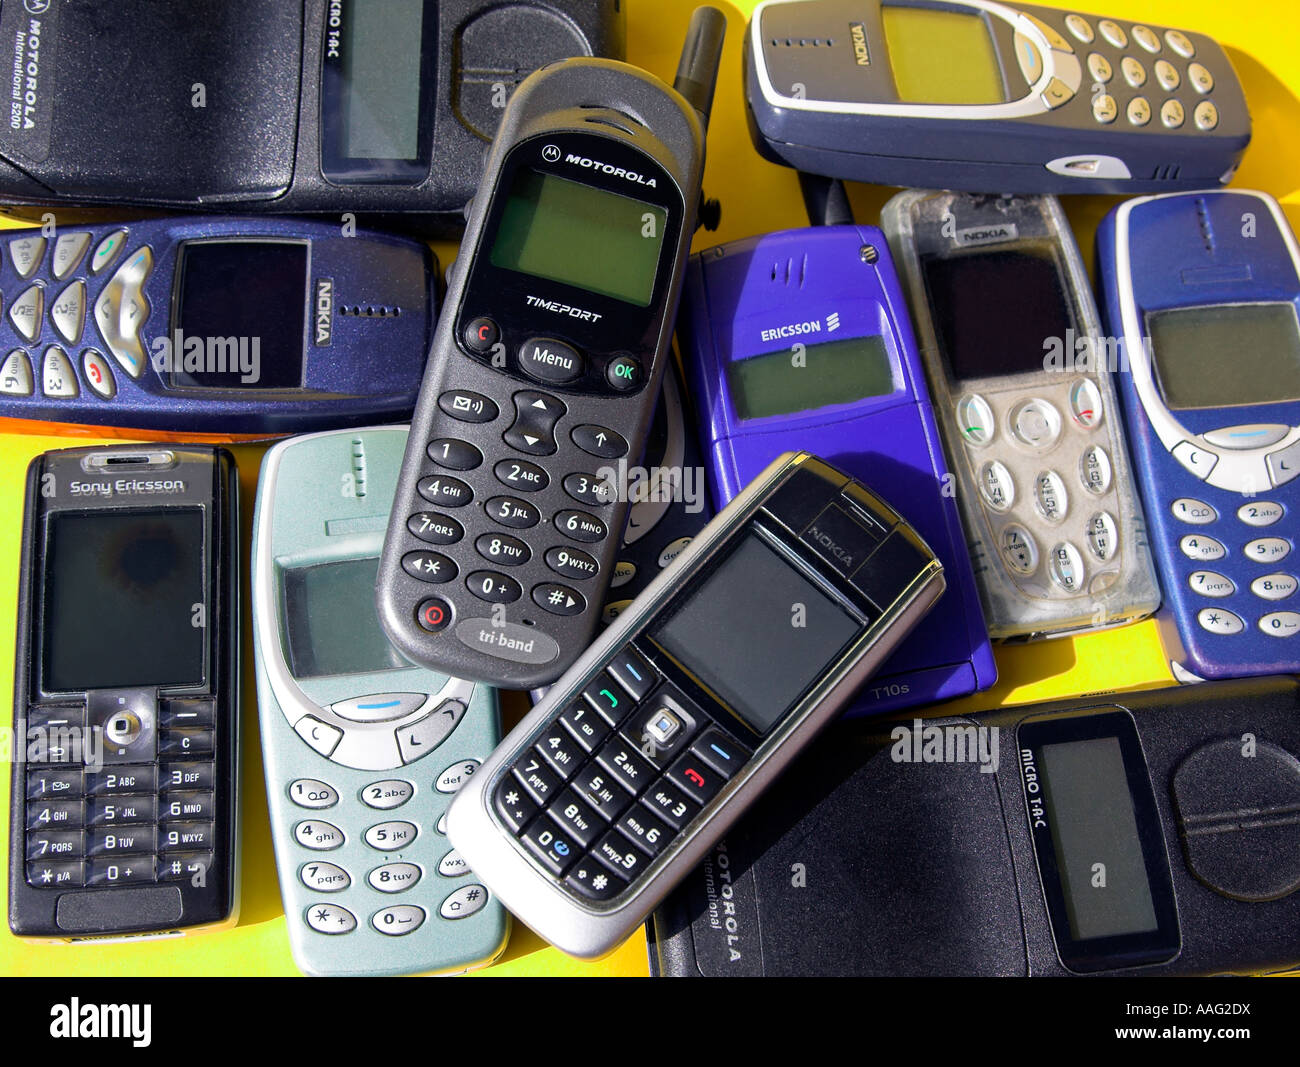 Collection of old mobile phones. Stock Photo